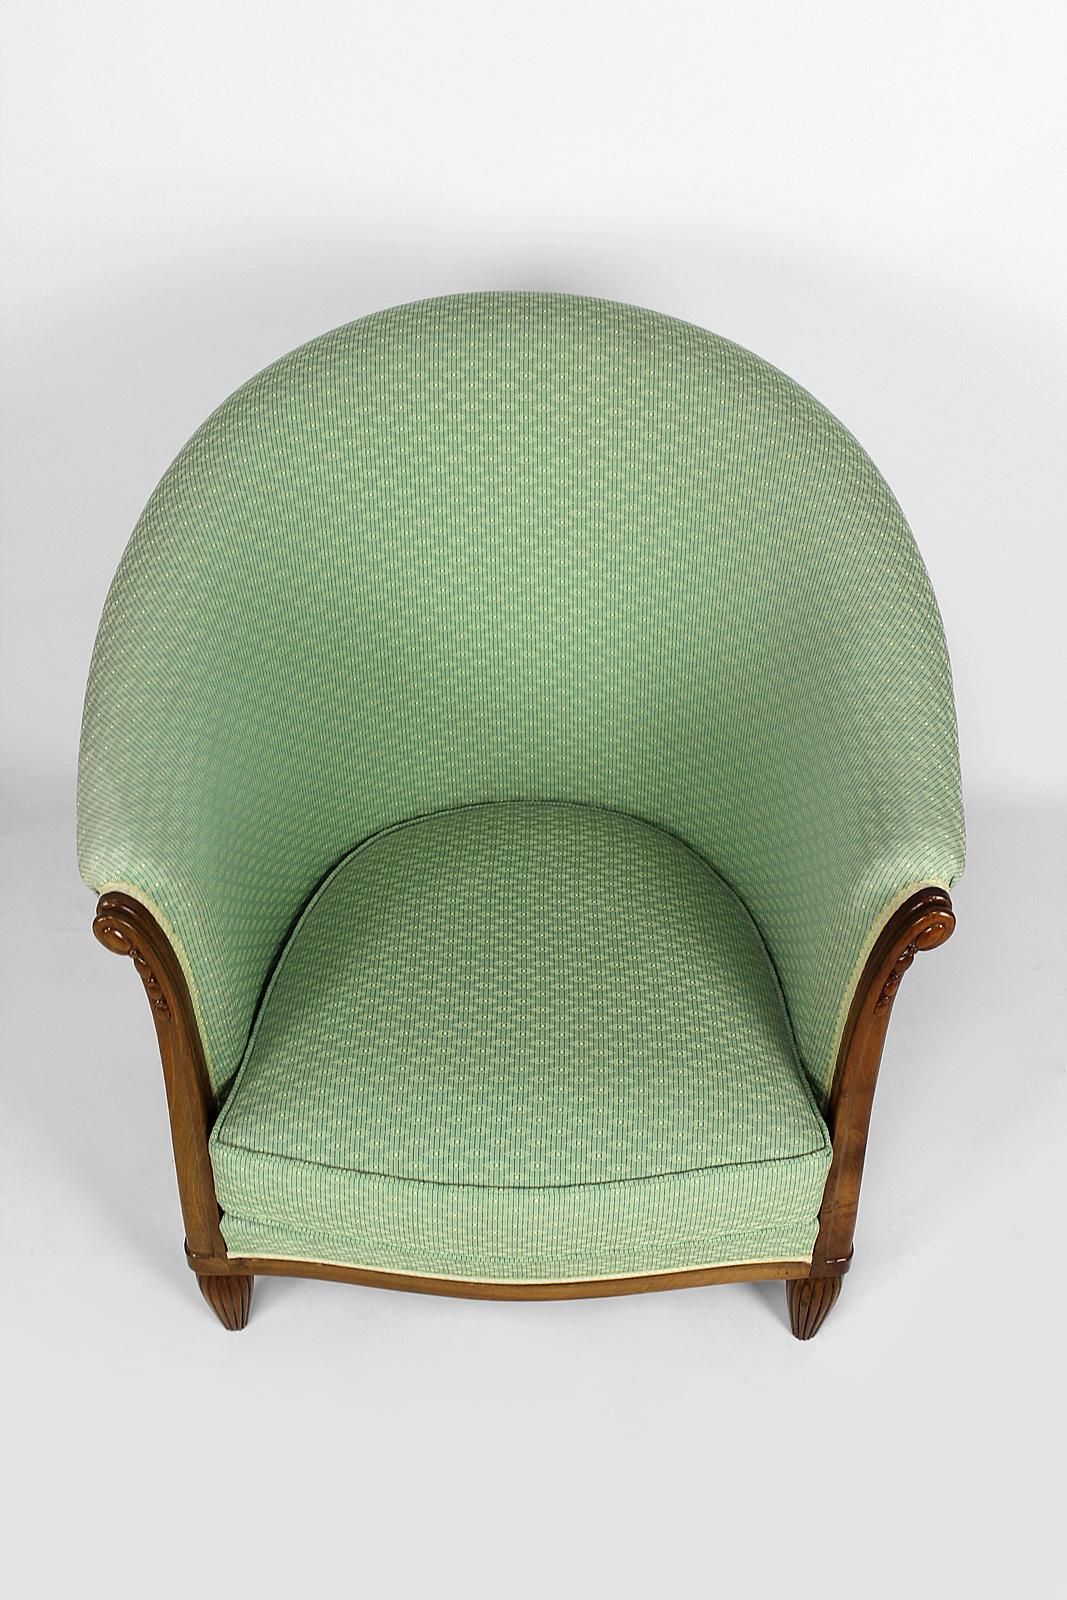 Art Deco Armchair by Ateliers Gauthier-Poinsignon in walnut, circa 1920-1930 For Sale 4